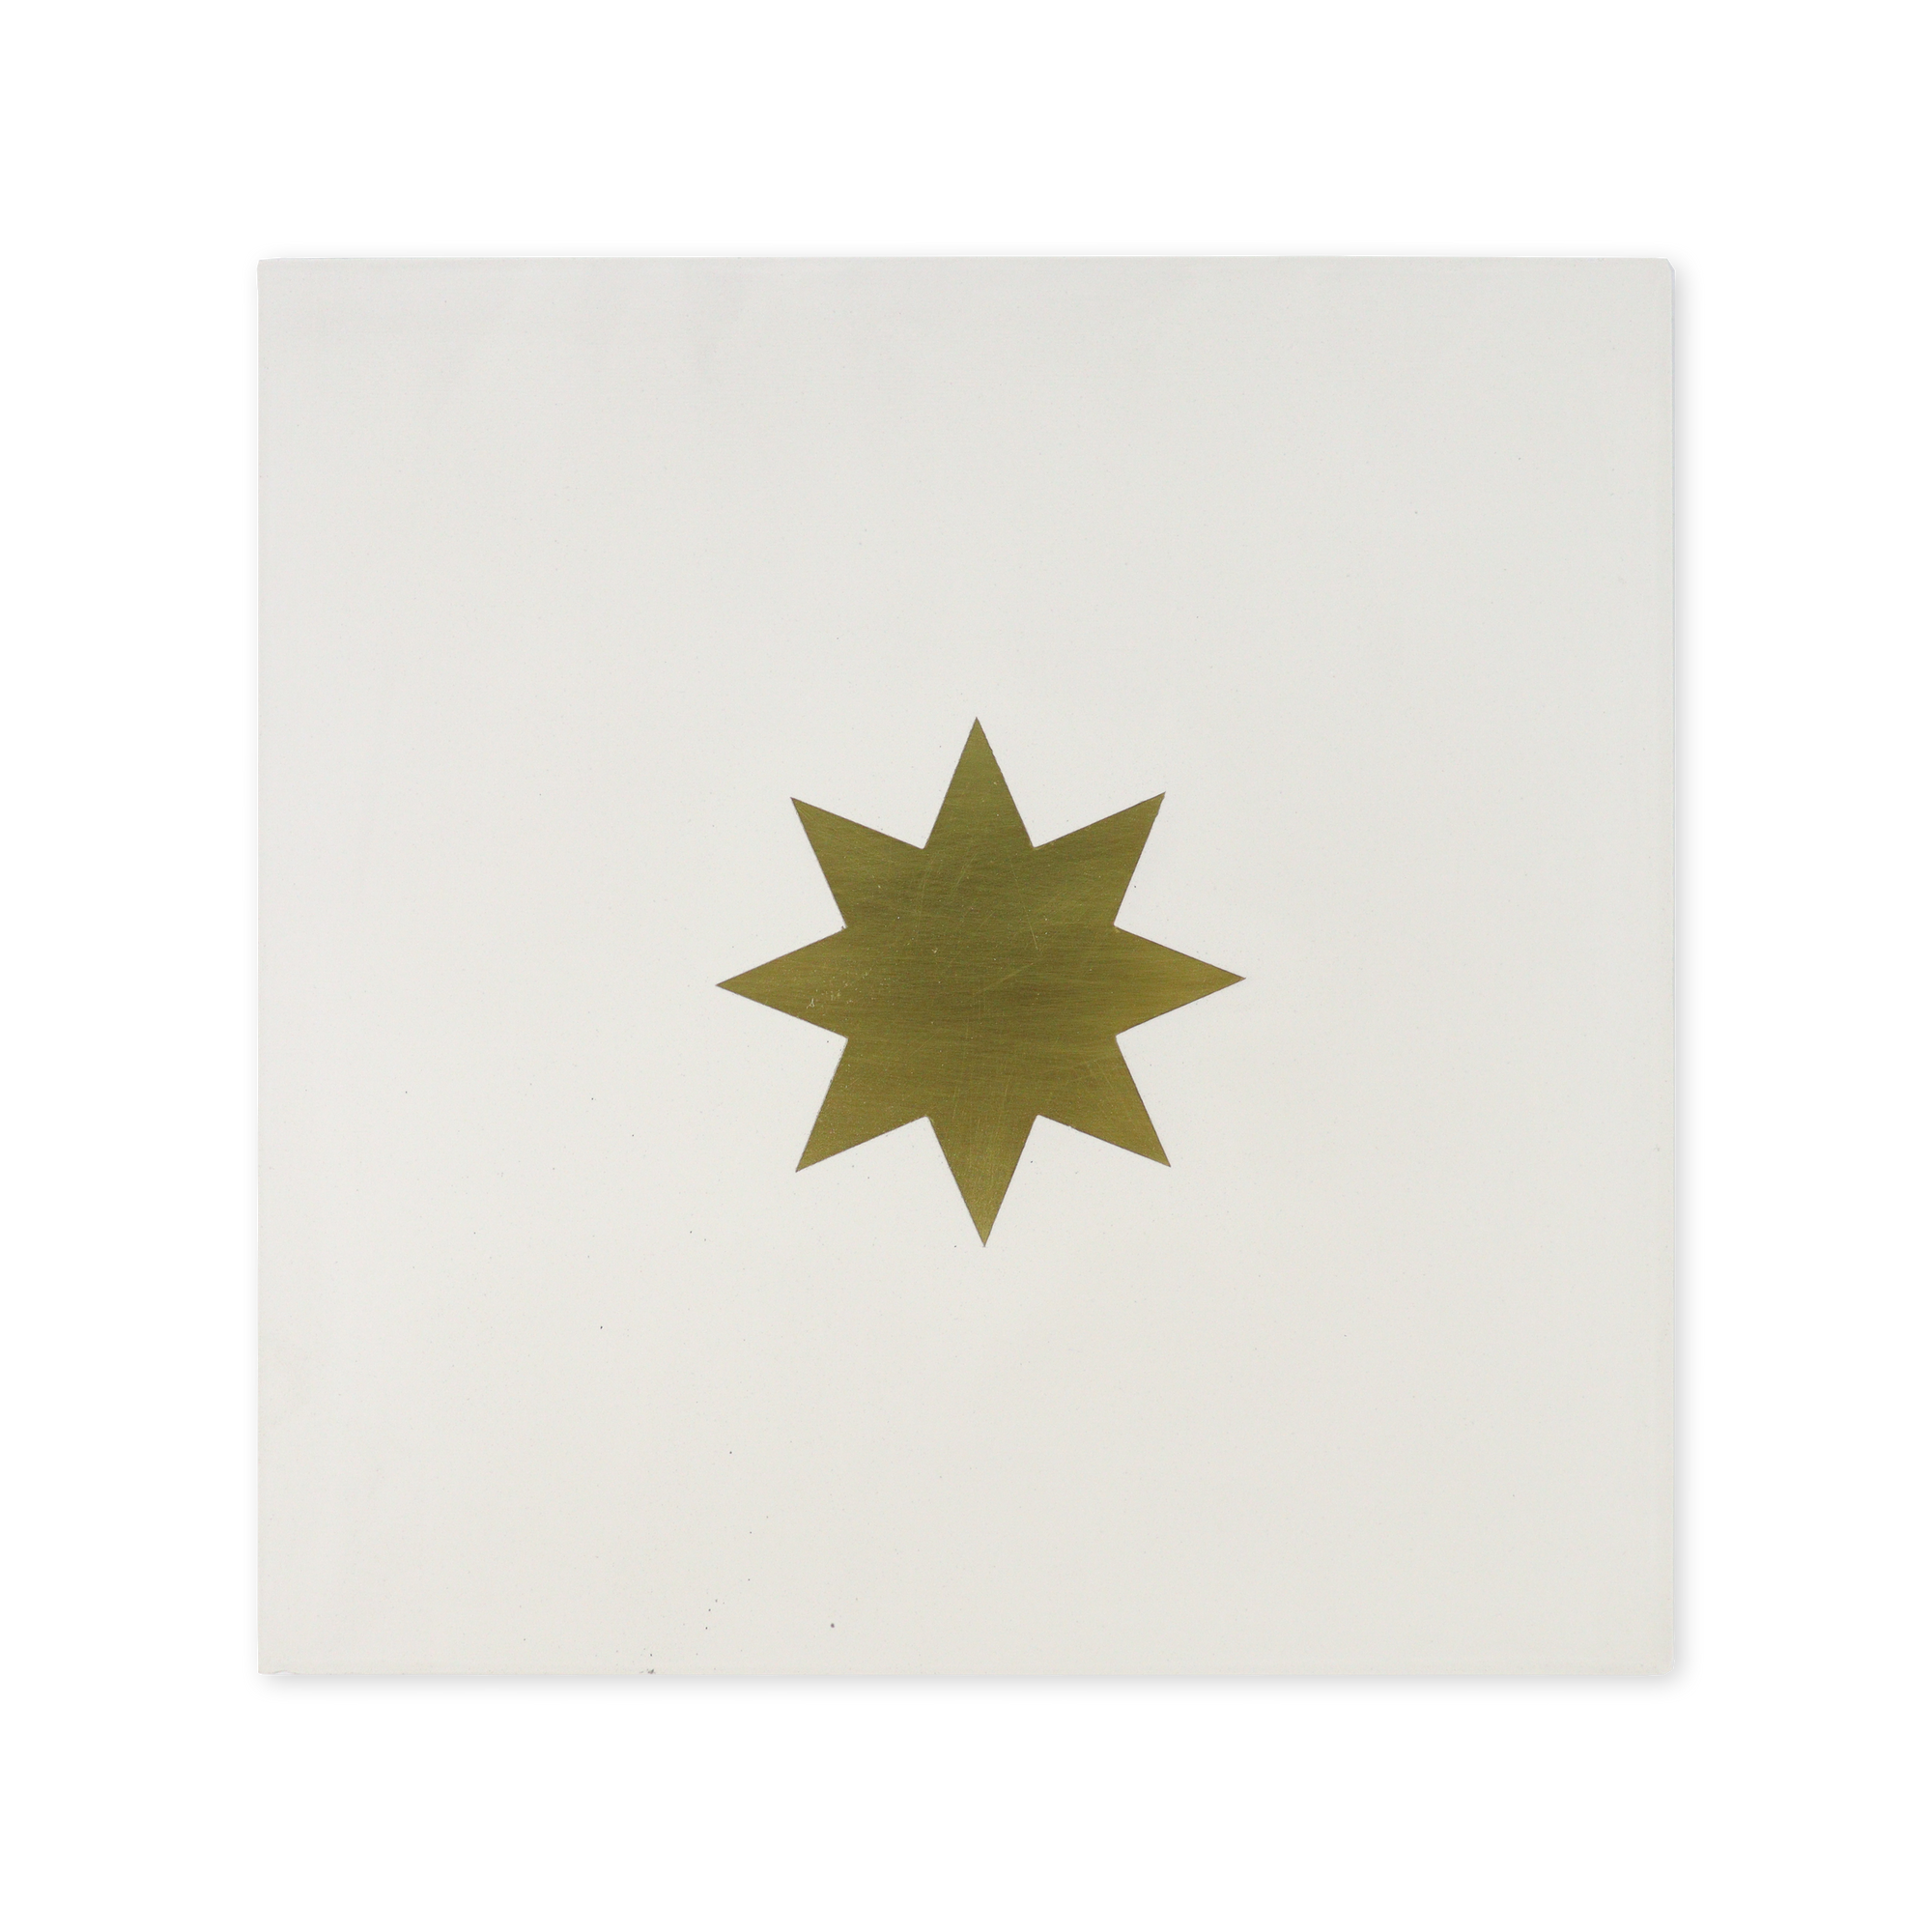 Queen® Cement Tile with Brass Inlay